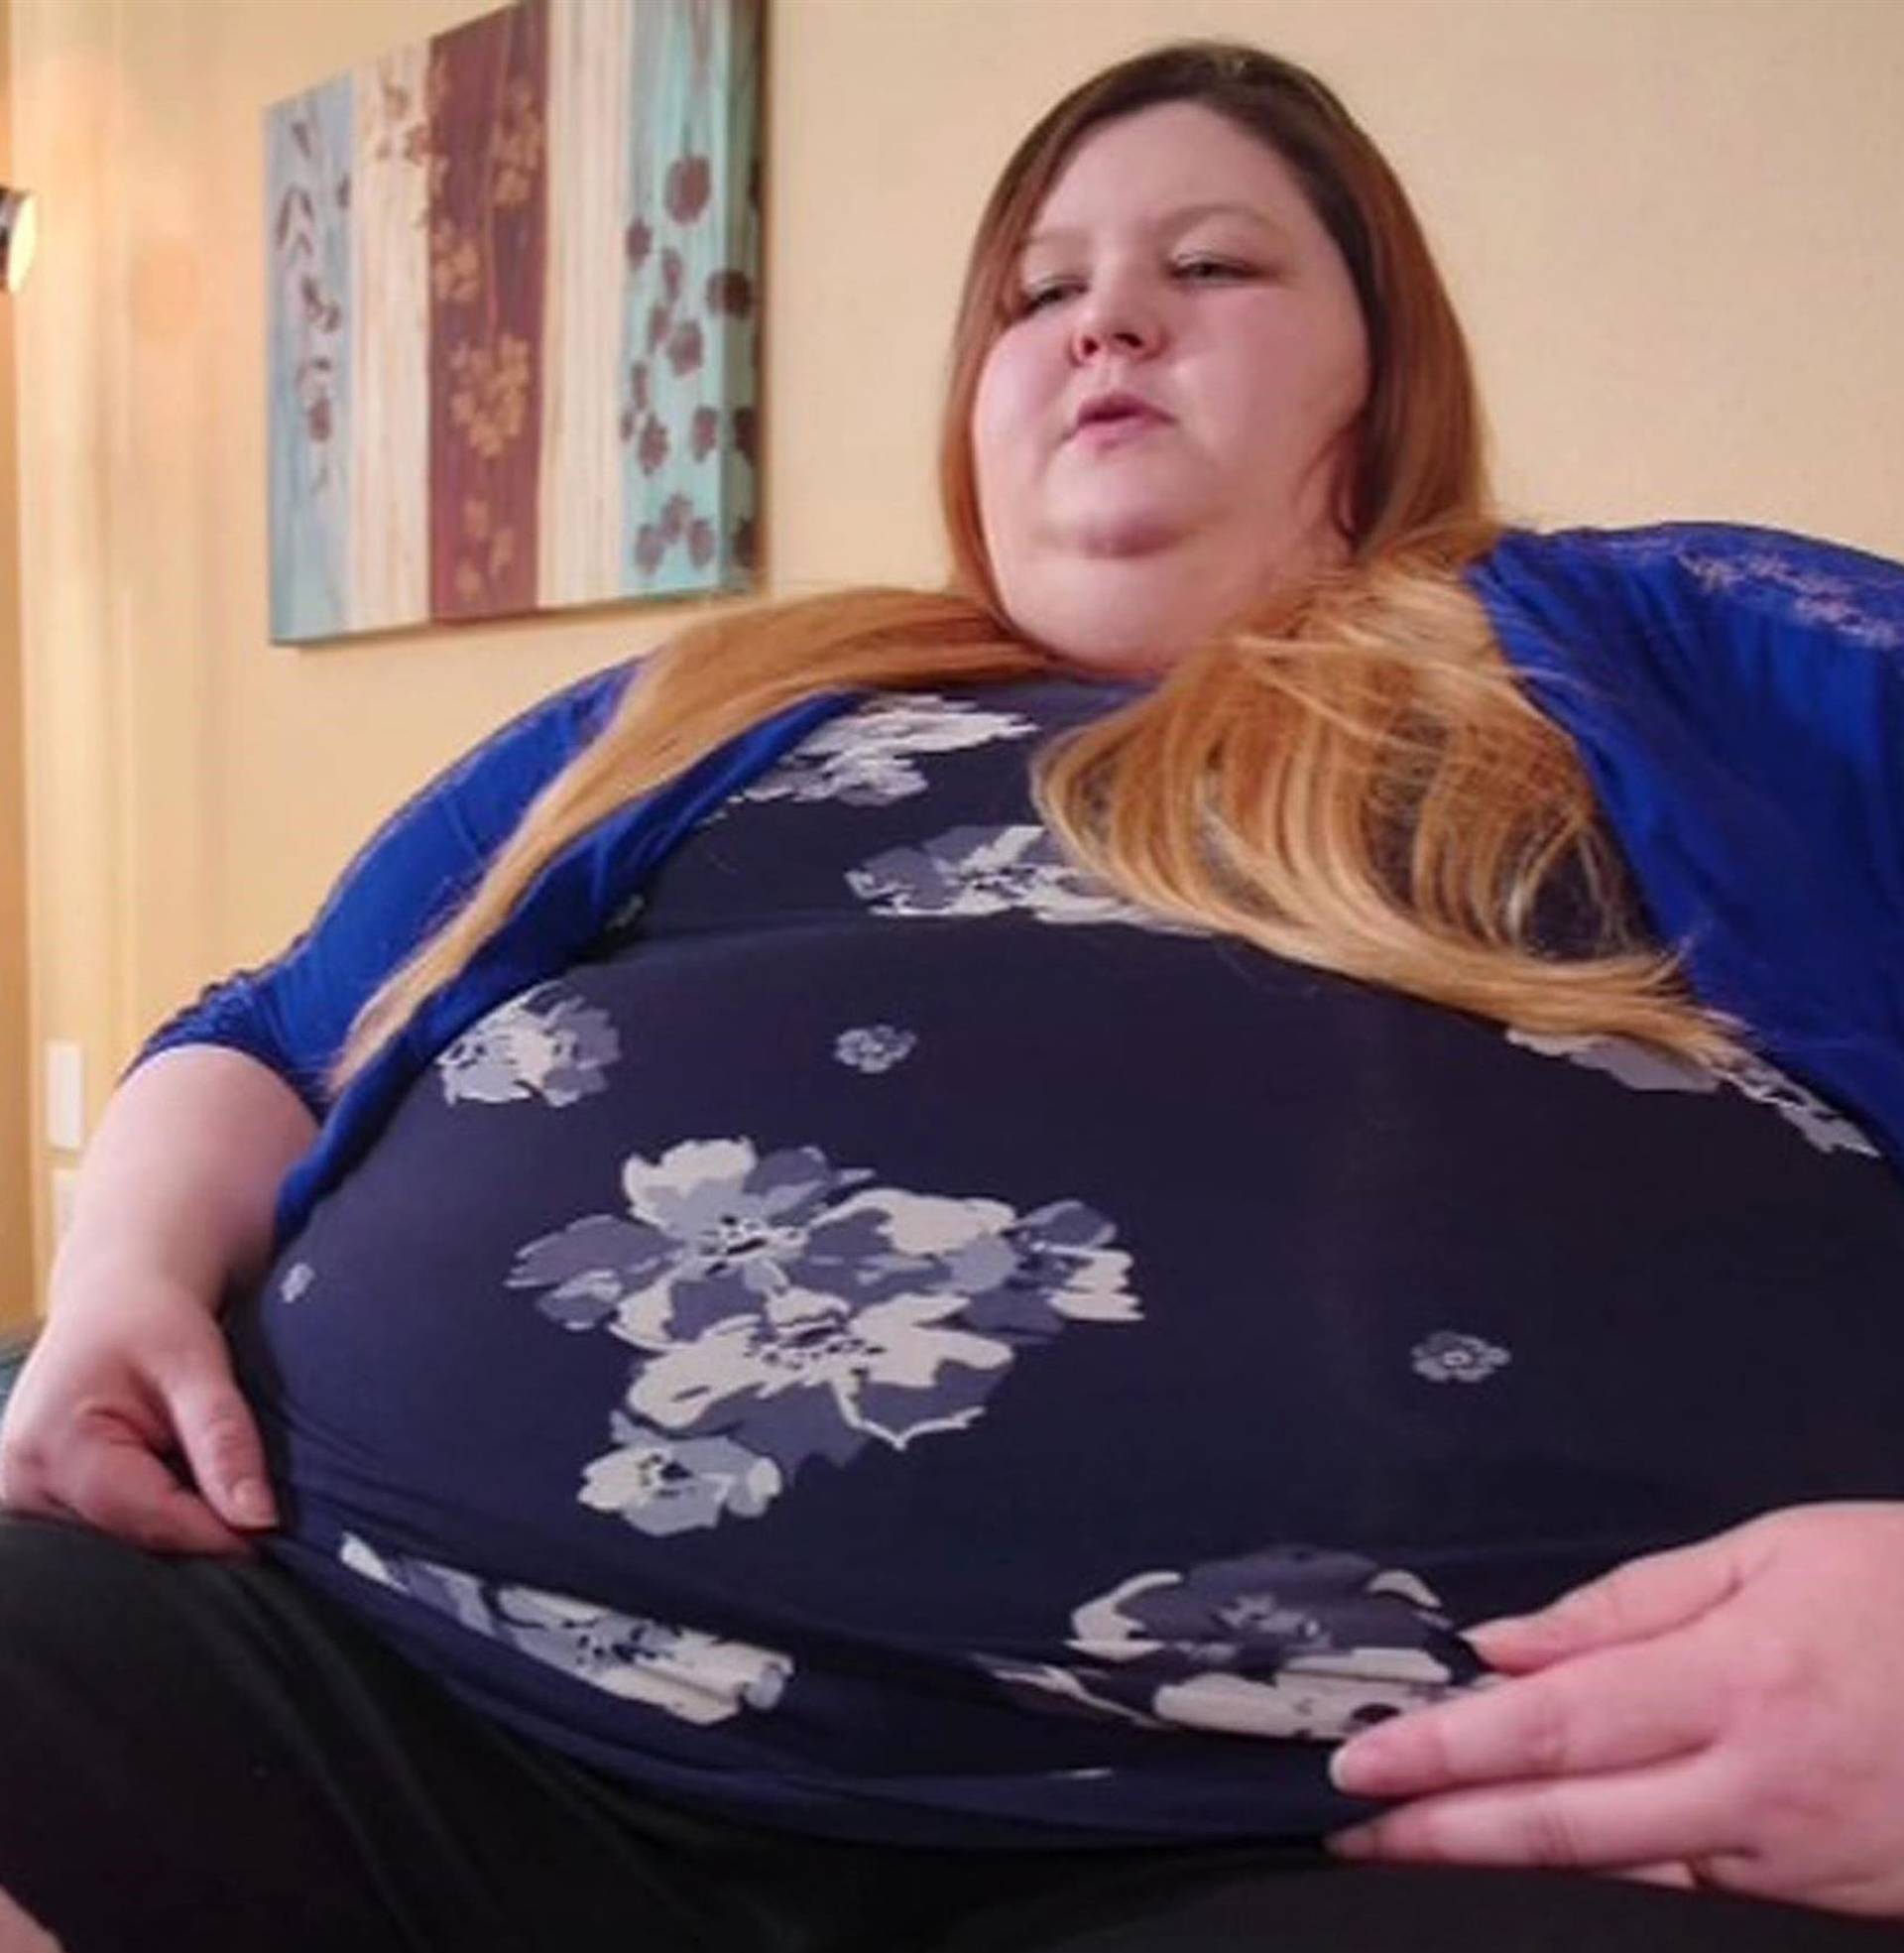 Obese Maja Radanovic quits the weightloss programme on TLC's My 600lb Life after losing just 100lb after her boyfriend leaves her